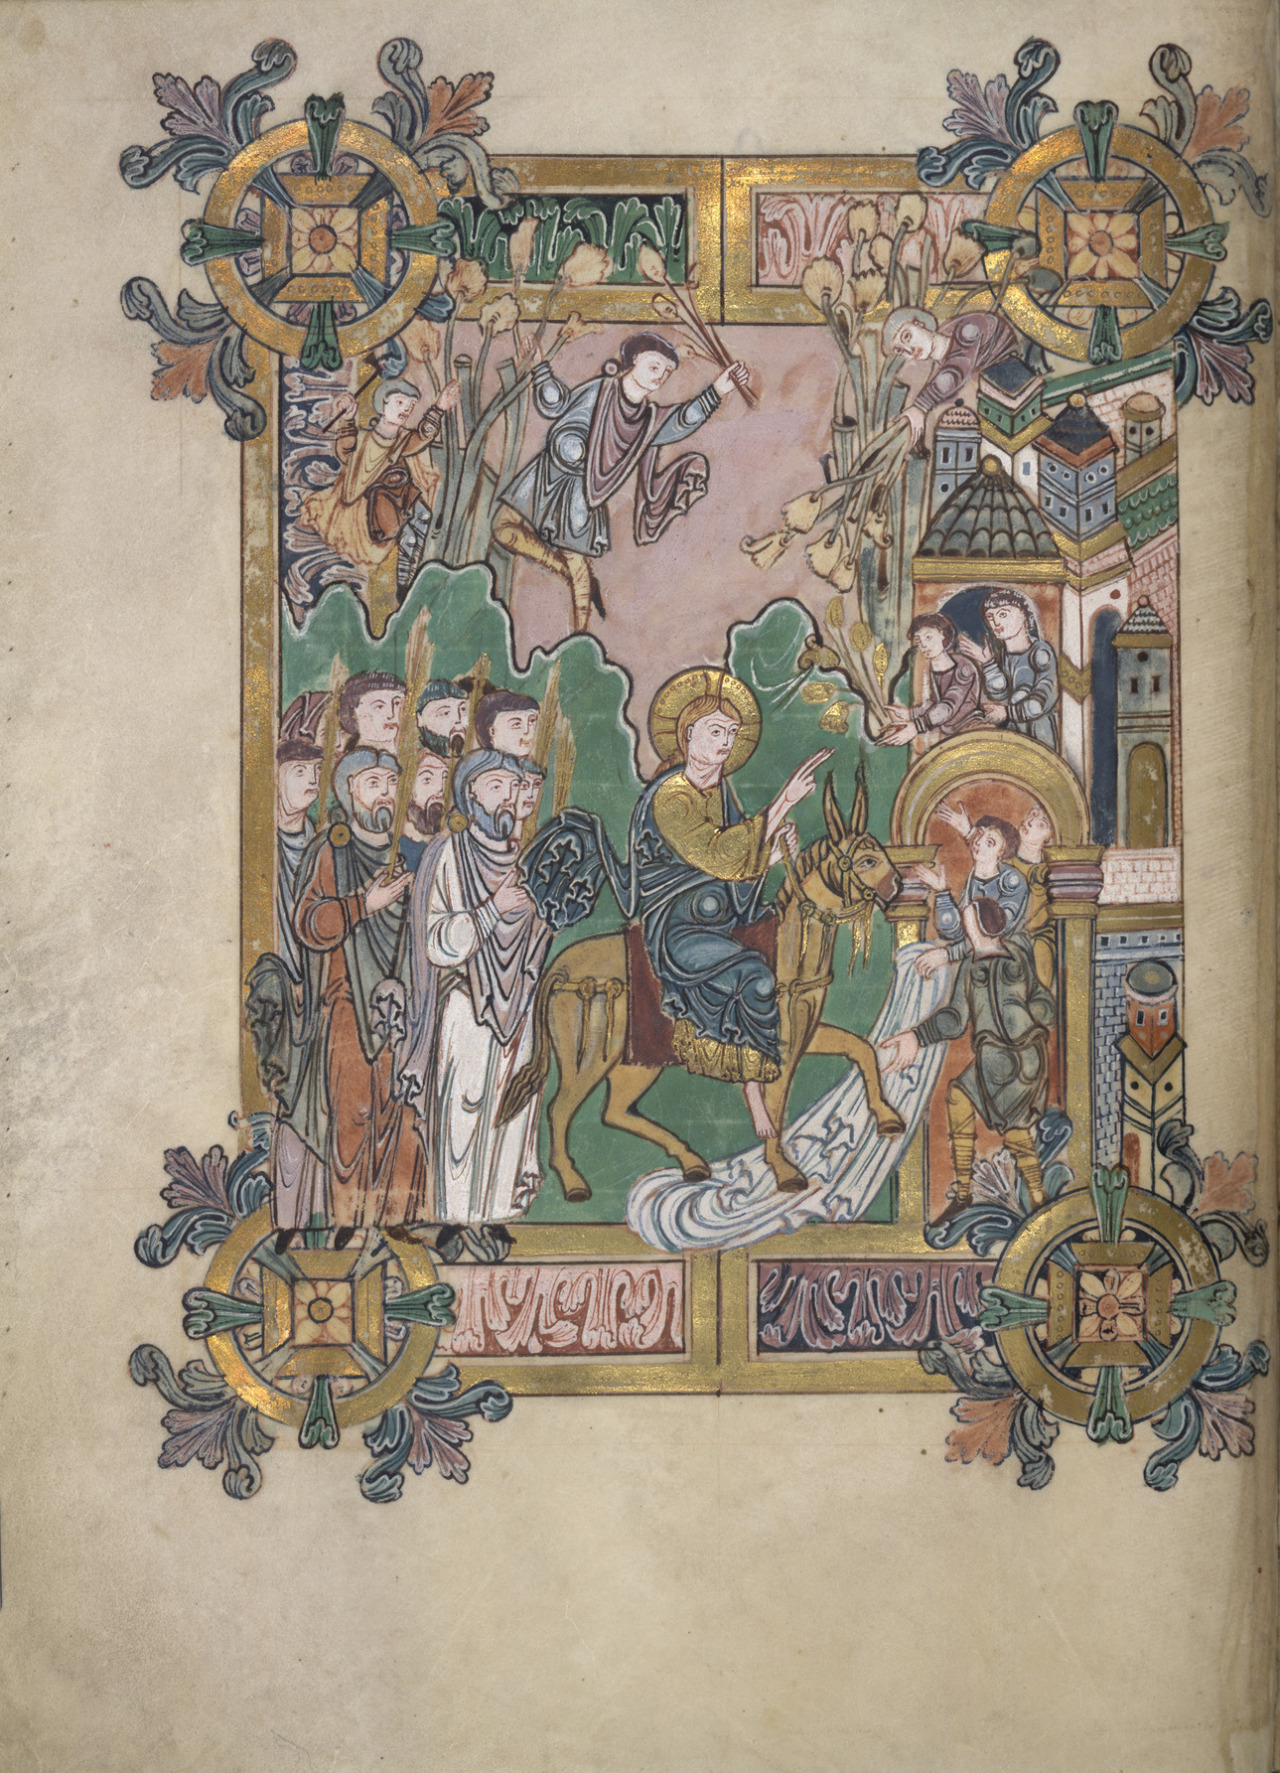 kutxx:
“1.
Christ’s entry into Jerusalem. The Benedictional of St Æthelwold. (Anglo-Saxon Winchester School of illumination)
10th century, miniature, British Library, London
”